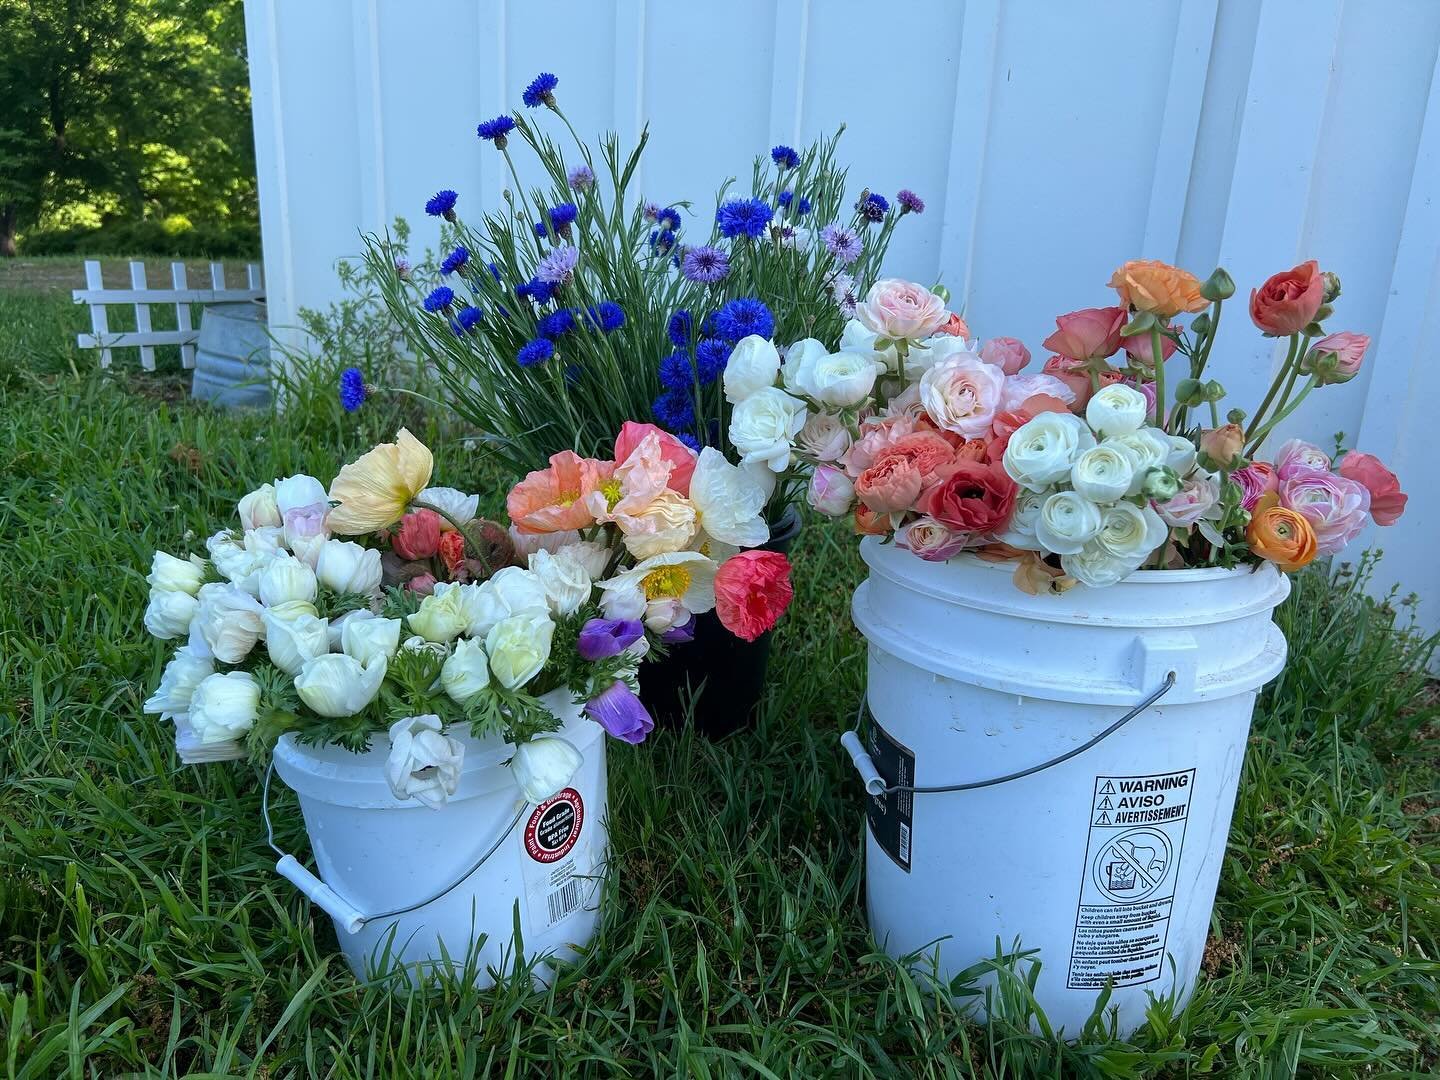 Wedding buckets are rolling out! 💍 So many happy beginnings starting this weekend. 💕

For micro weddings, dinner parties and garden events, I offer bulk bunches of our seasonal flowers for pick up. 🚙

So many pretty things coming into bloom now! ?